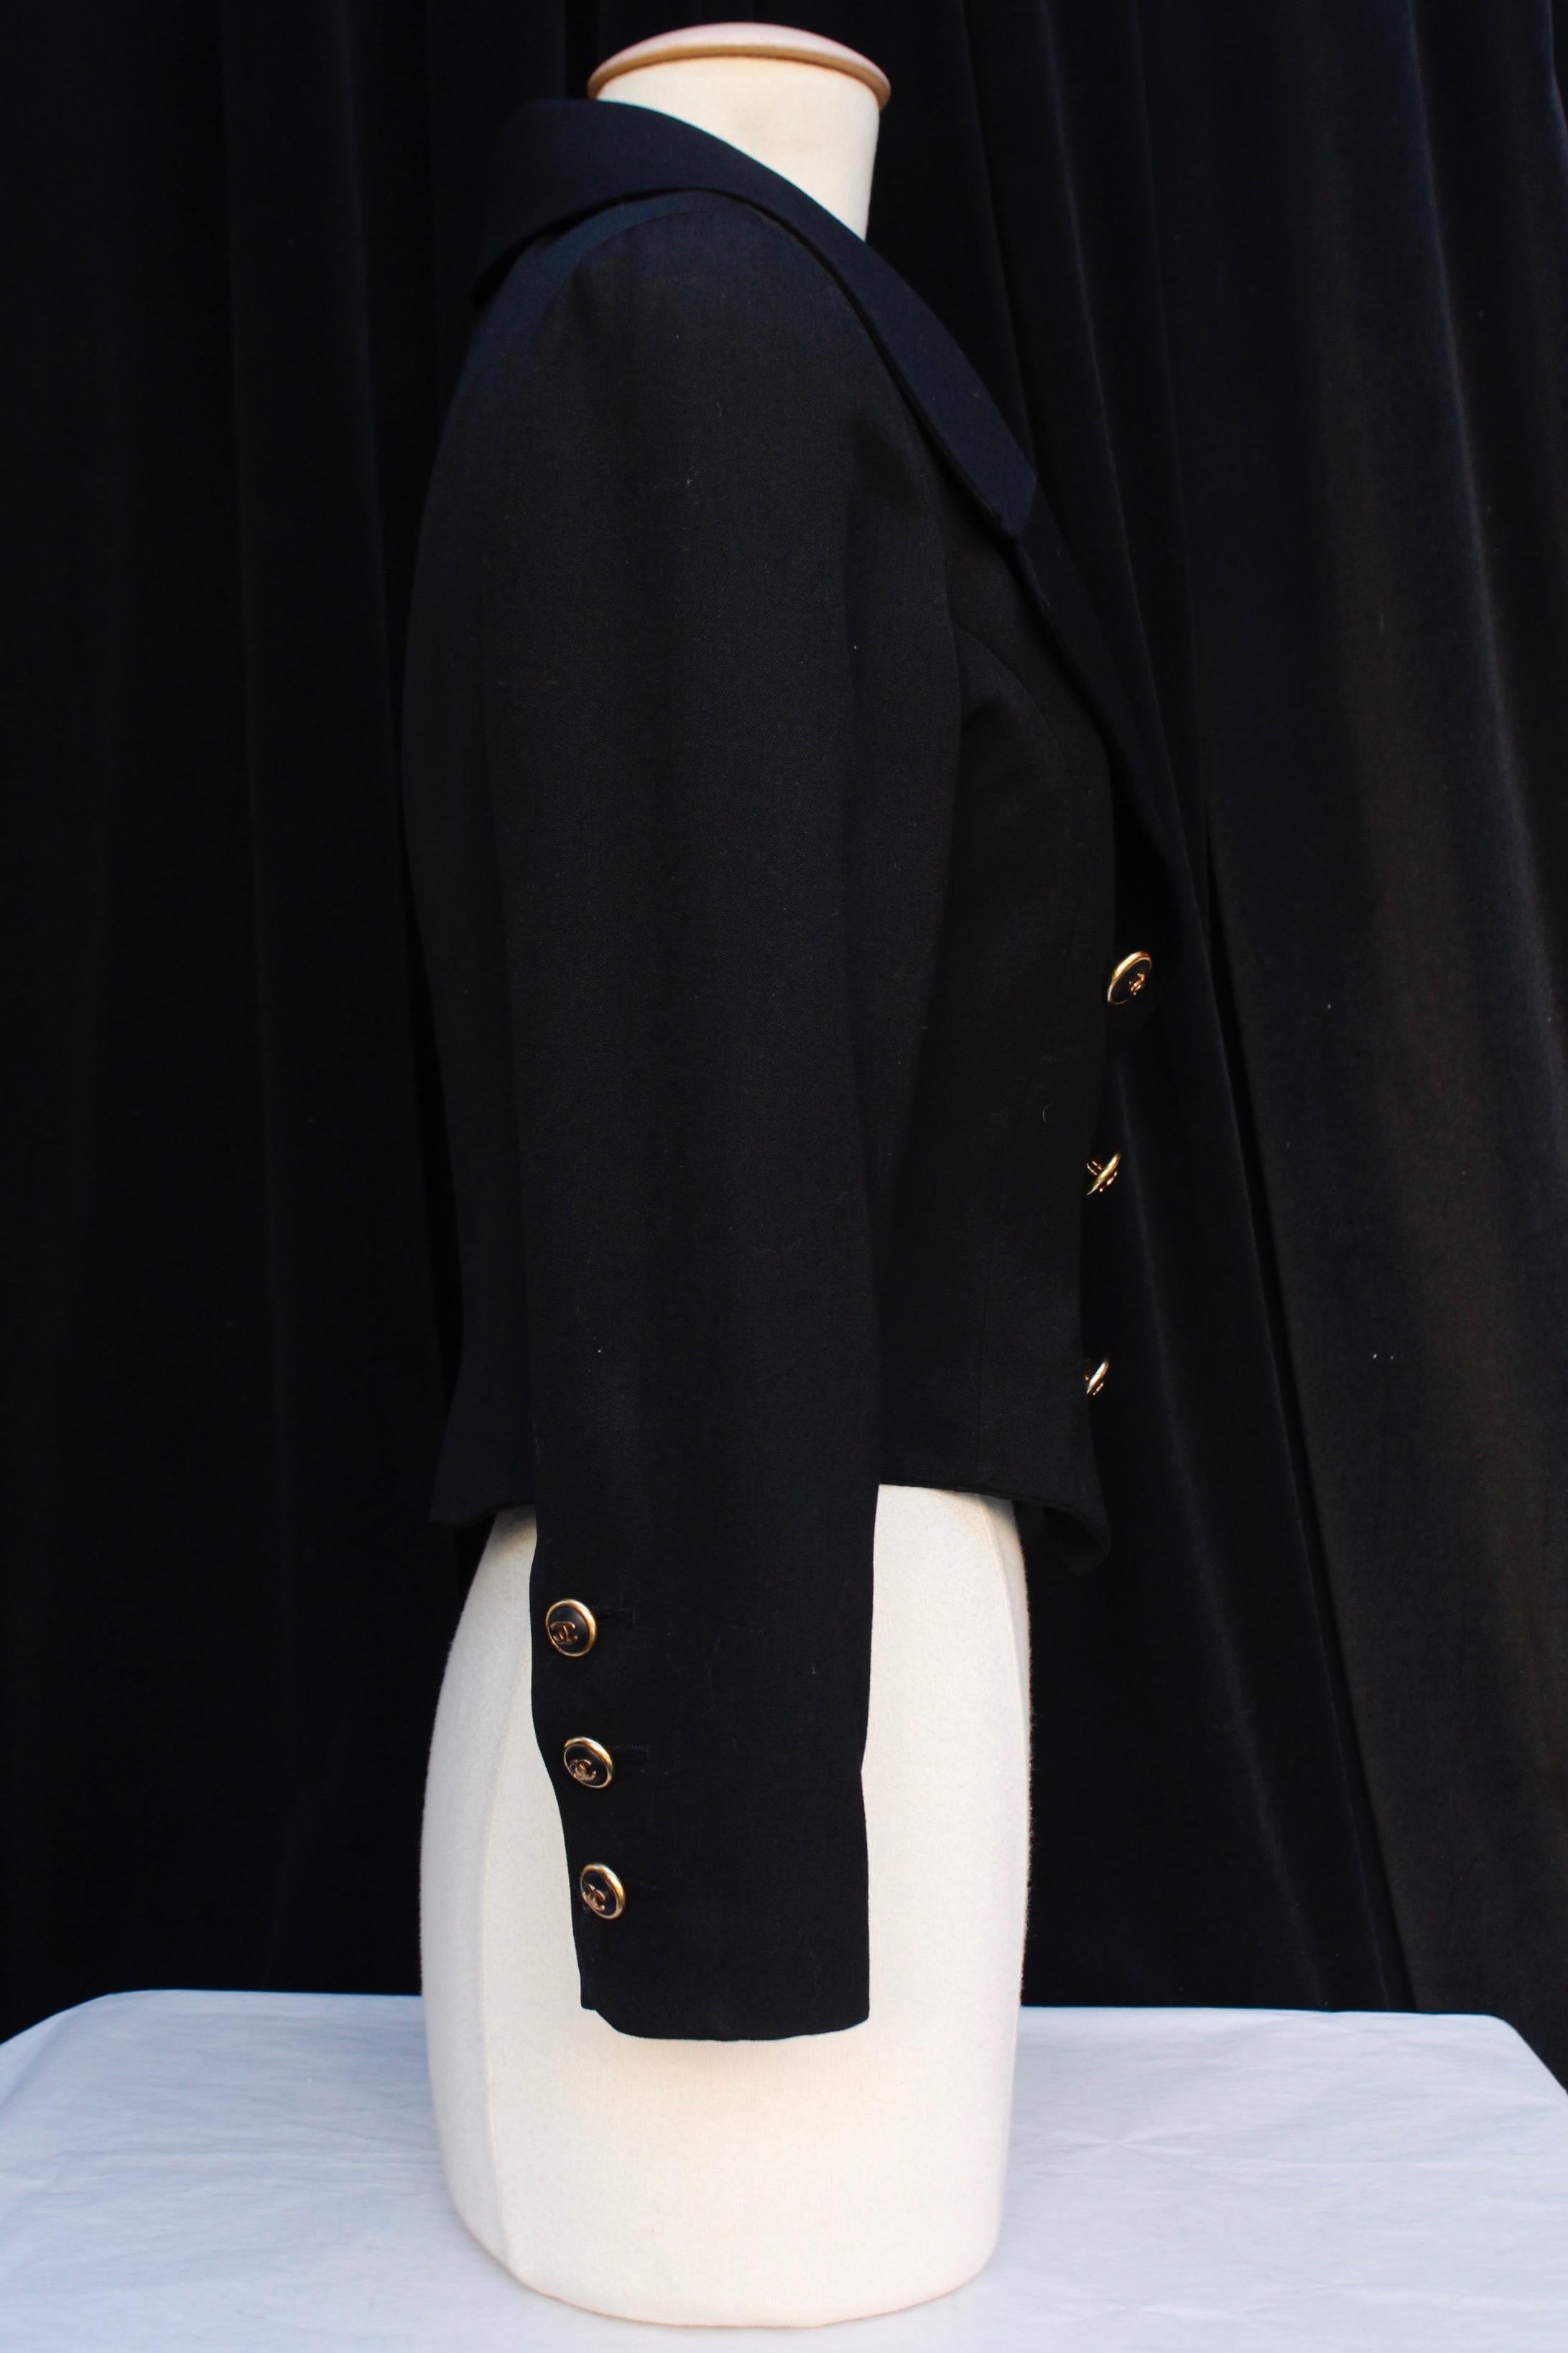 CHANEL BOUTIQUE – Elegant short jacket composed of black cotton blend, with long sleeves and tailored collar. It closes with a double series of gilded metal and black resin buttons with gilded metal CC logo. Black monogrammed silk lining.

No